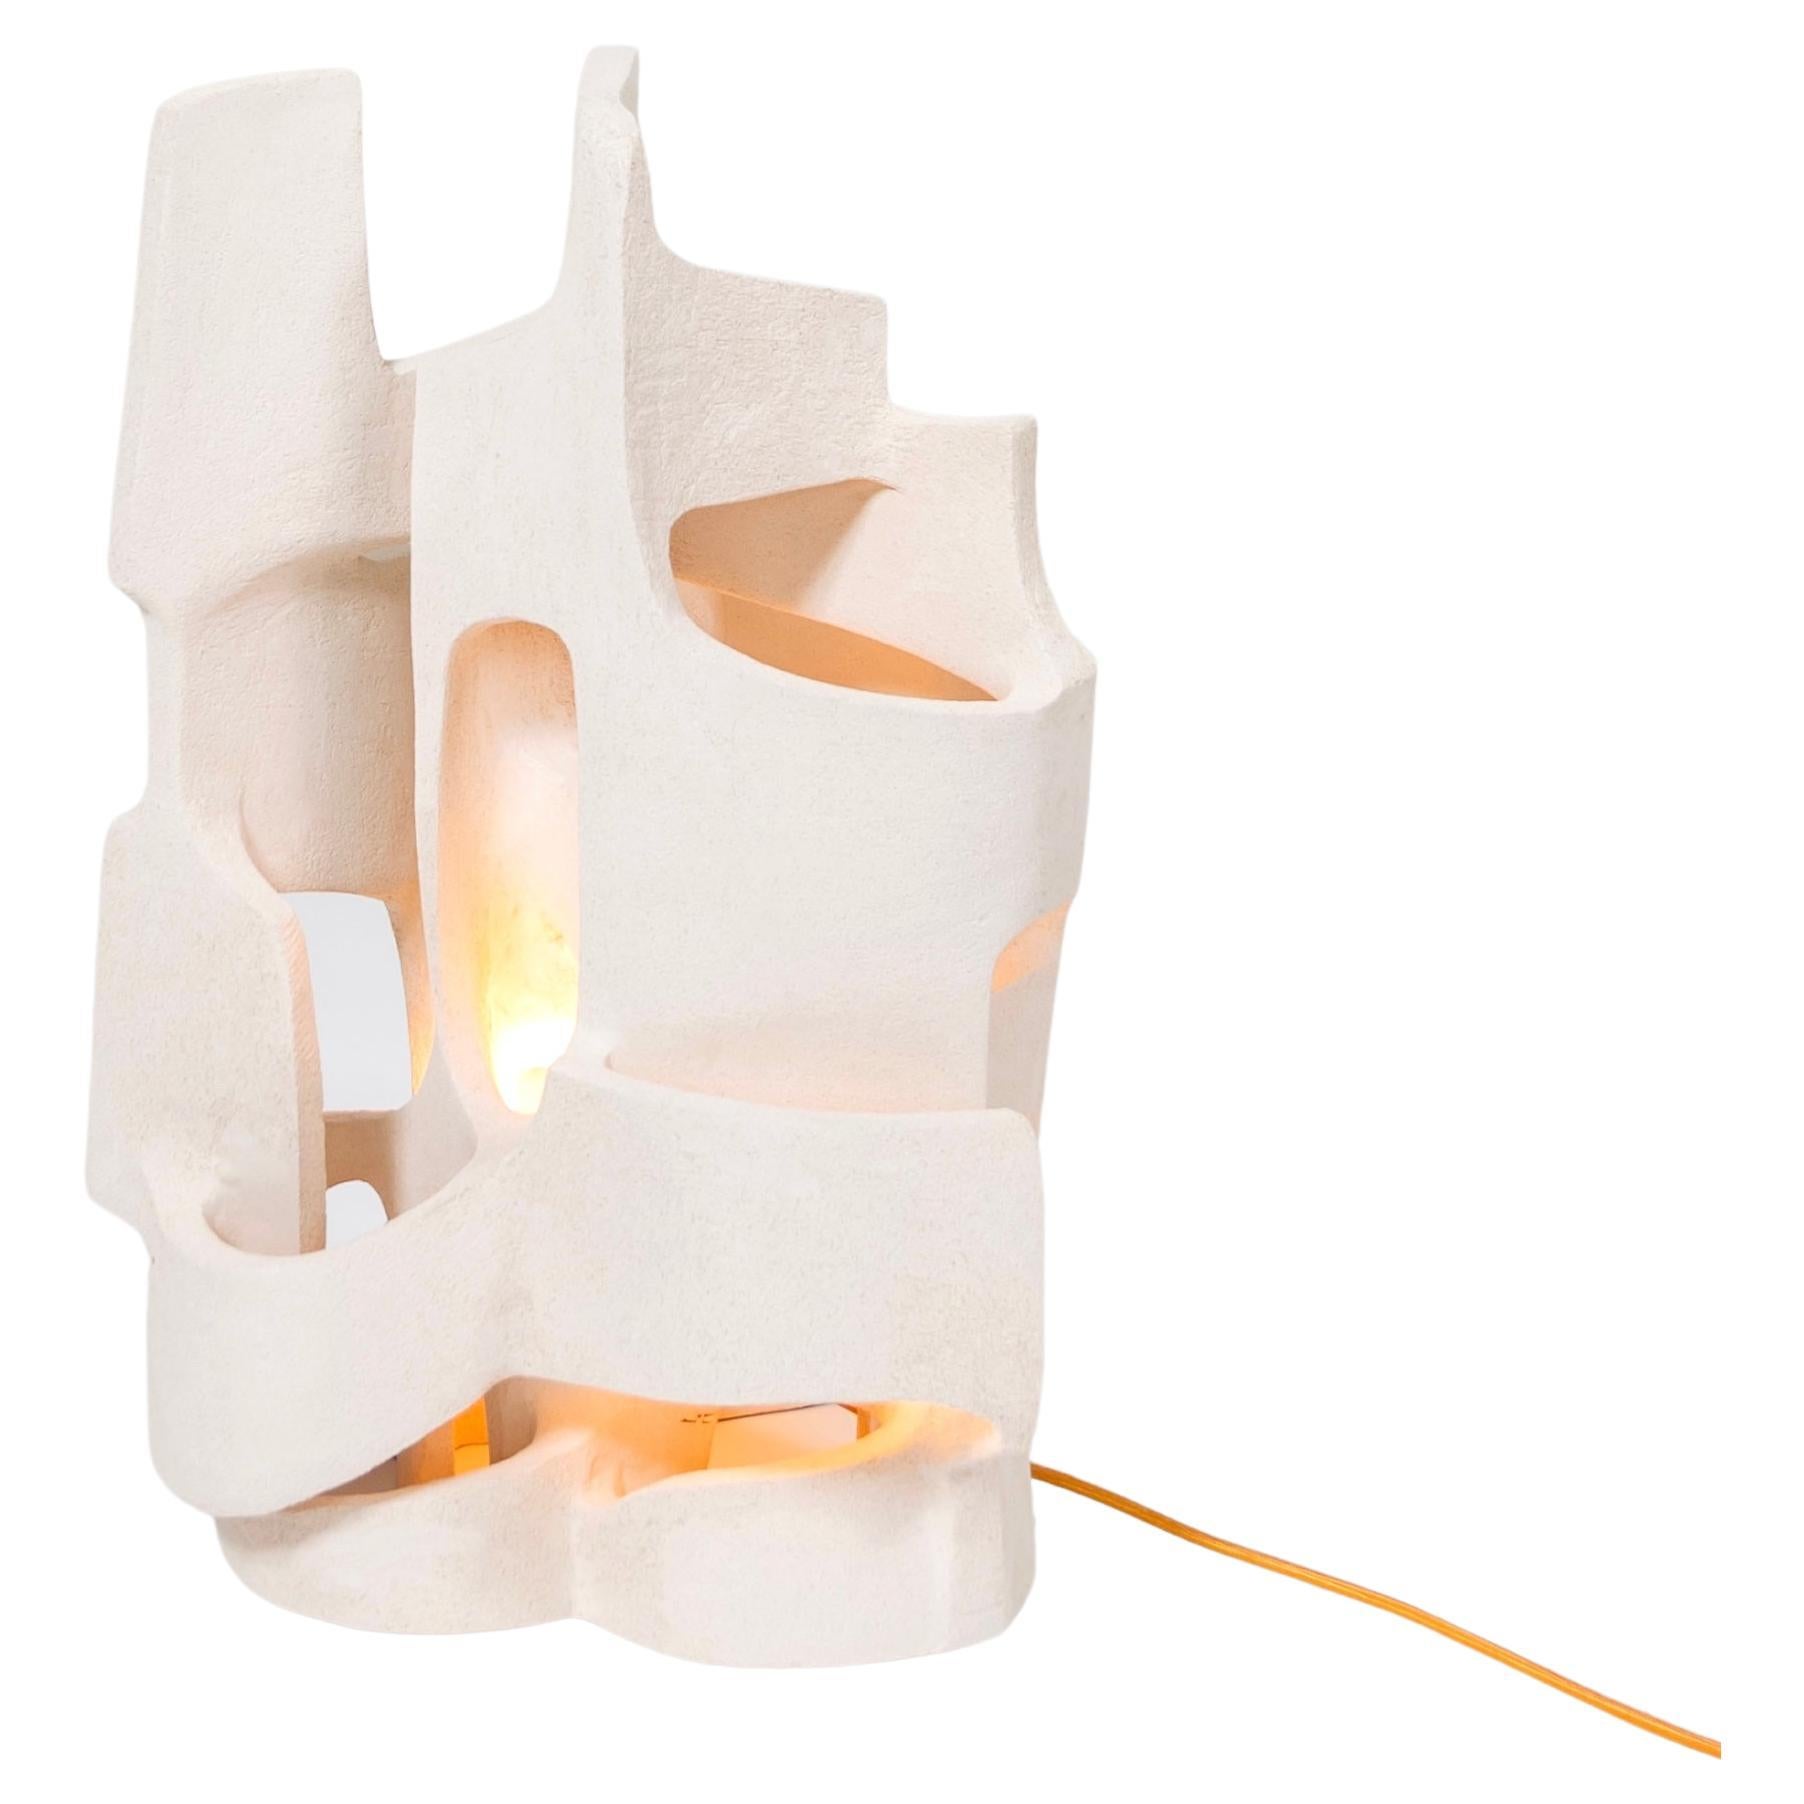 Contemporary Architectural Ceramic Table Lamp by Camille Le Dressay